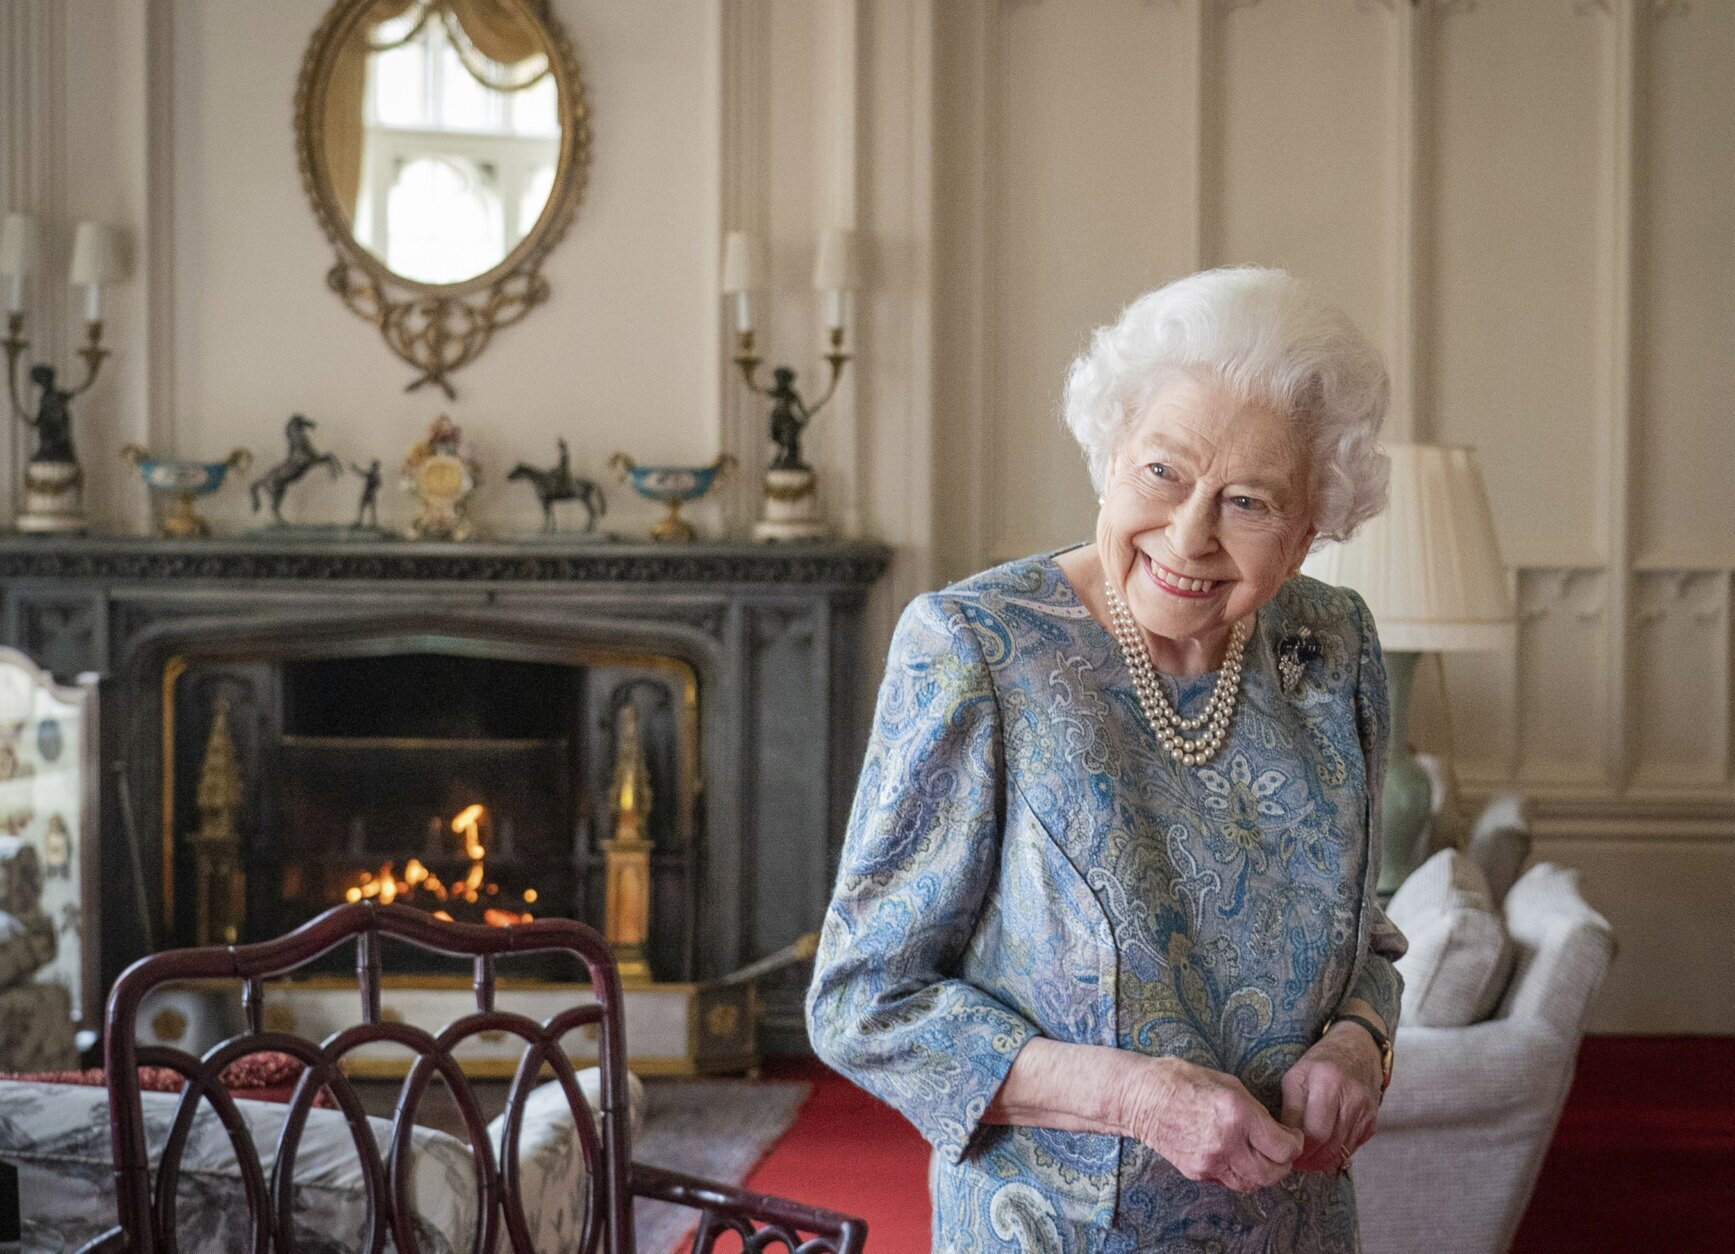 A look at Queen Elizabeth II’s style through the decades - WTOP News